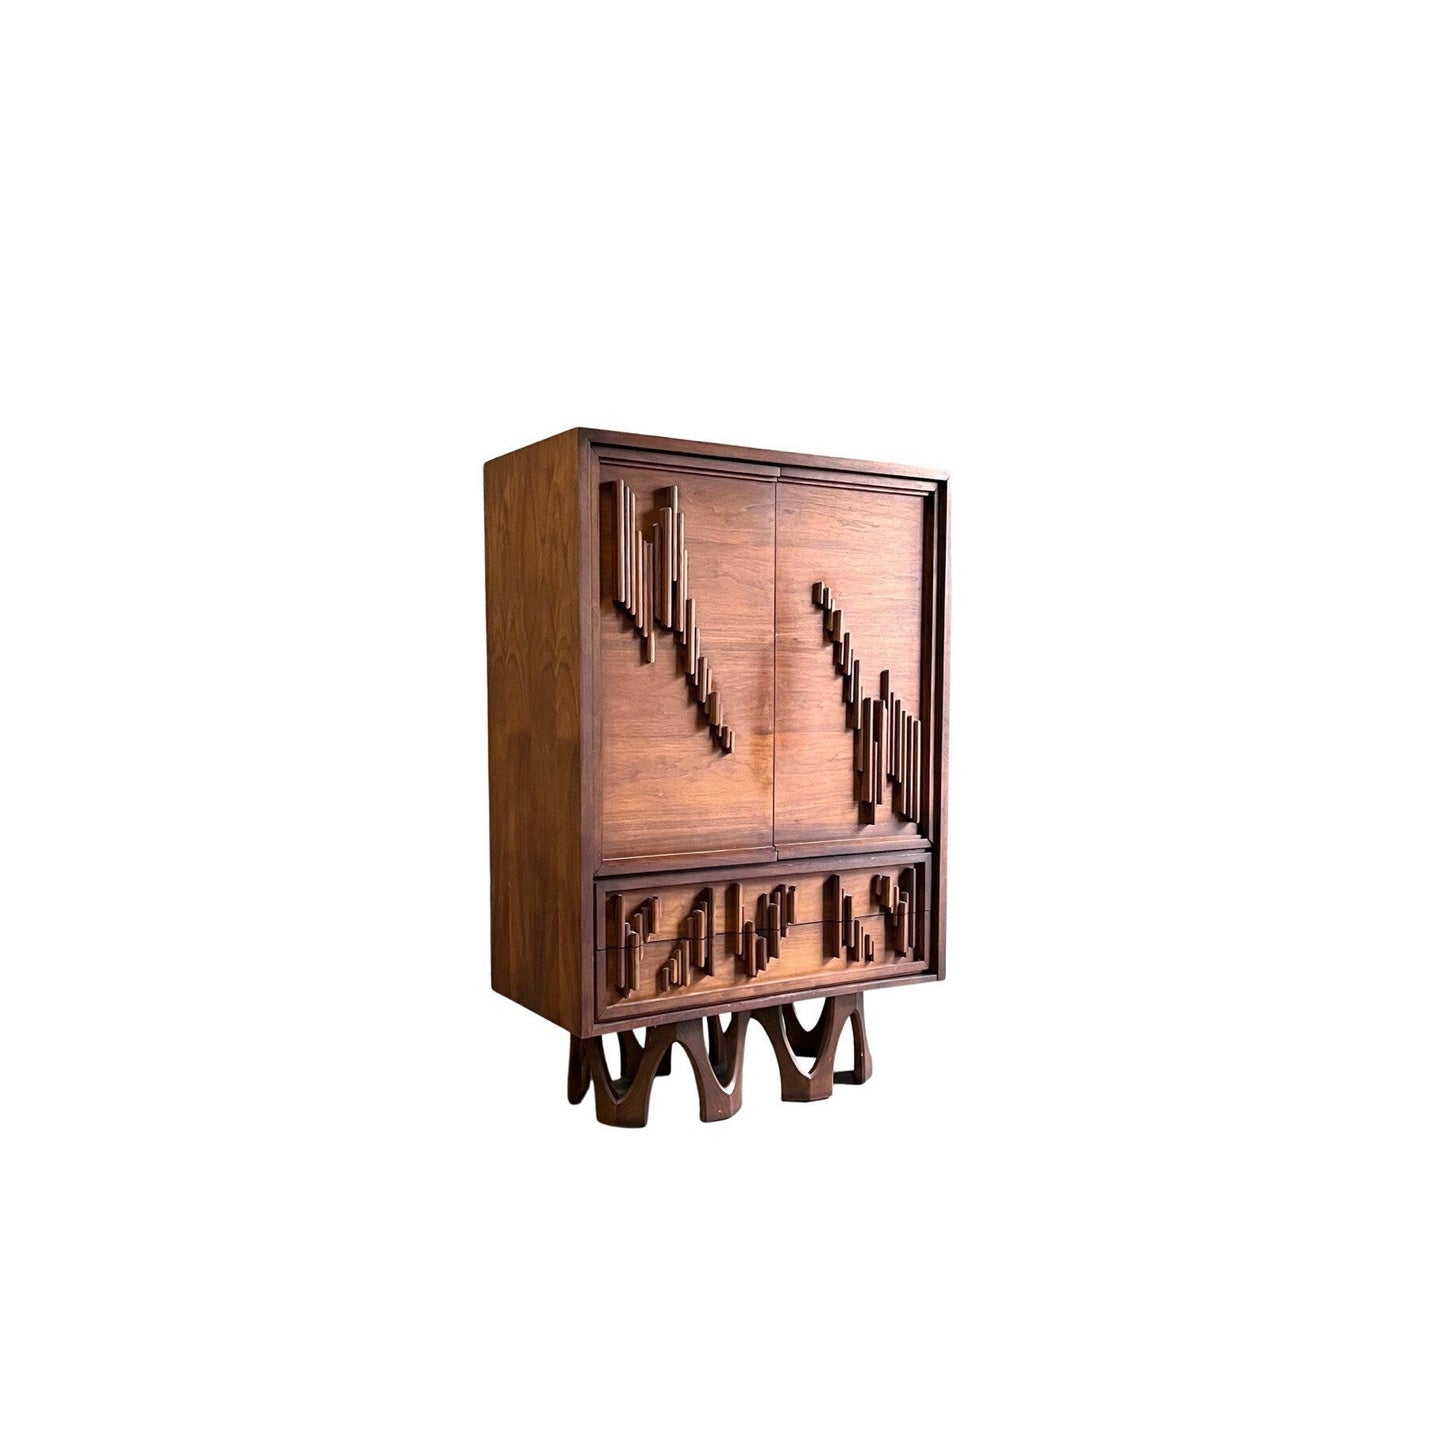 Brutalist style armoire crafted from rich walnut, showcasing unique 3D elements.